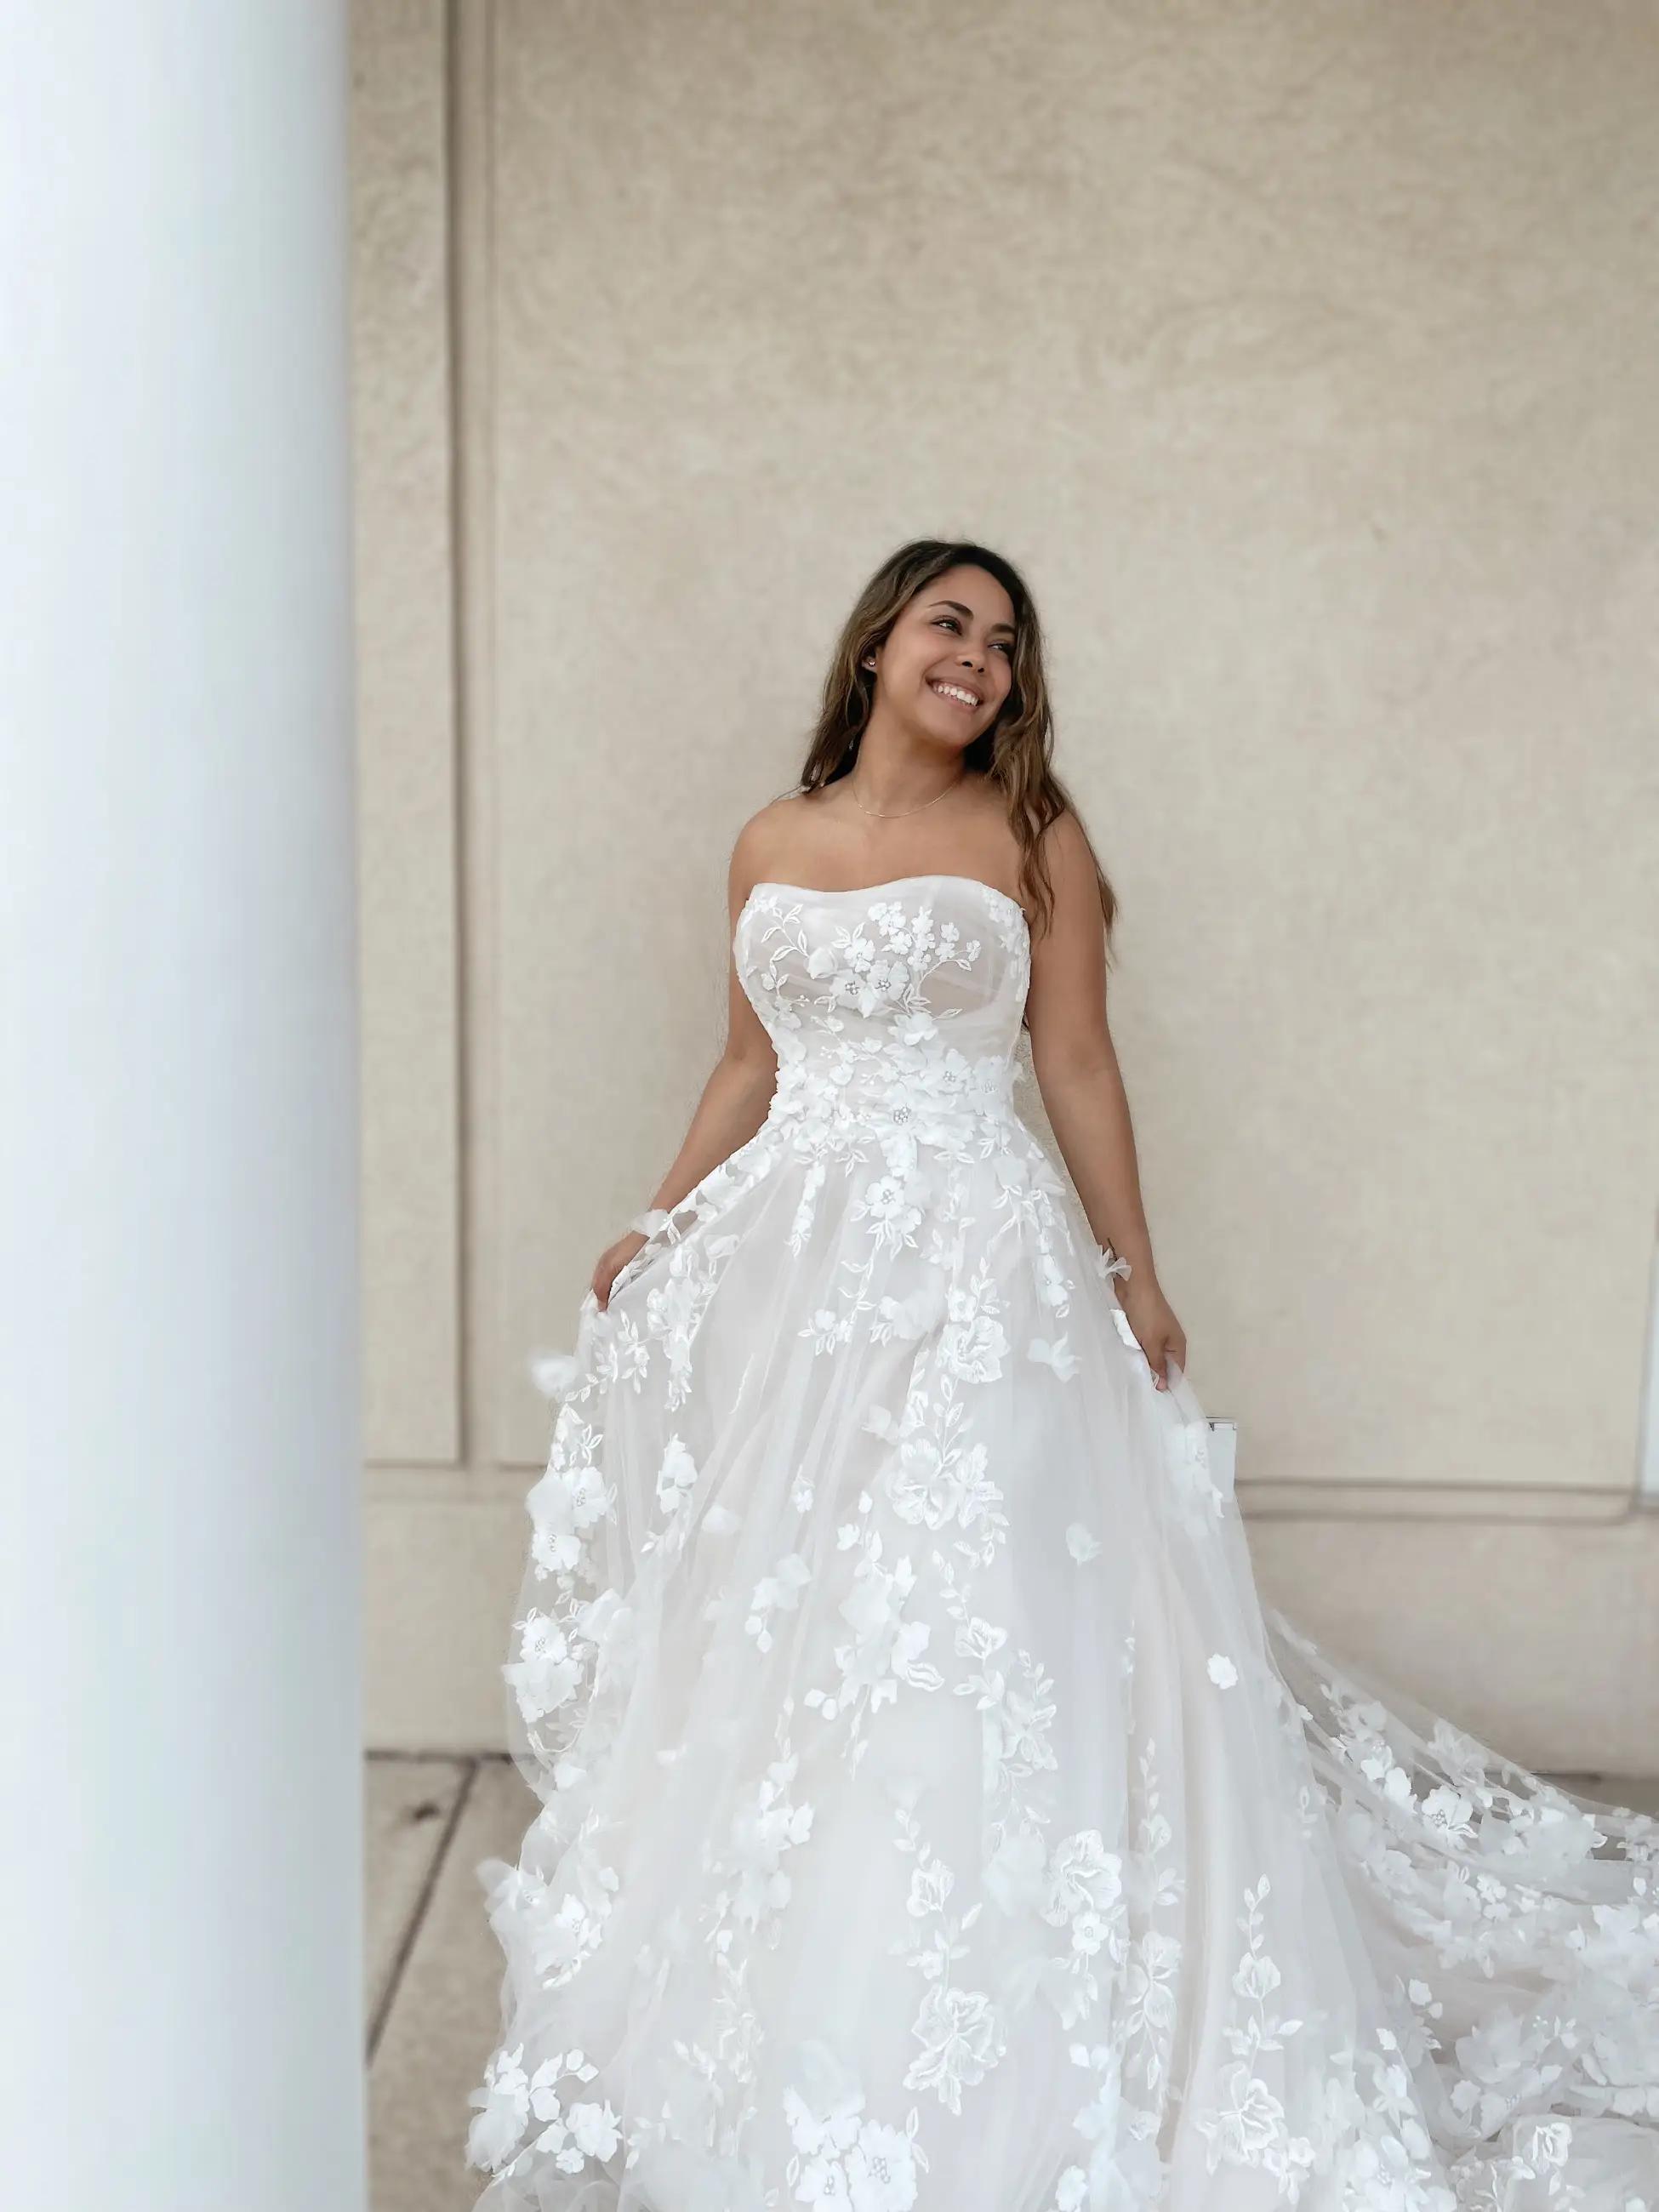 Unbeatable Deals at Michelle&#39;s Bridal and Tuxedo&#39;s National Bridal Sale Event Image